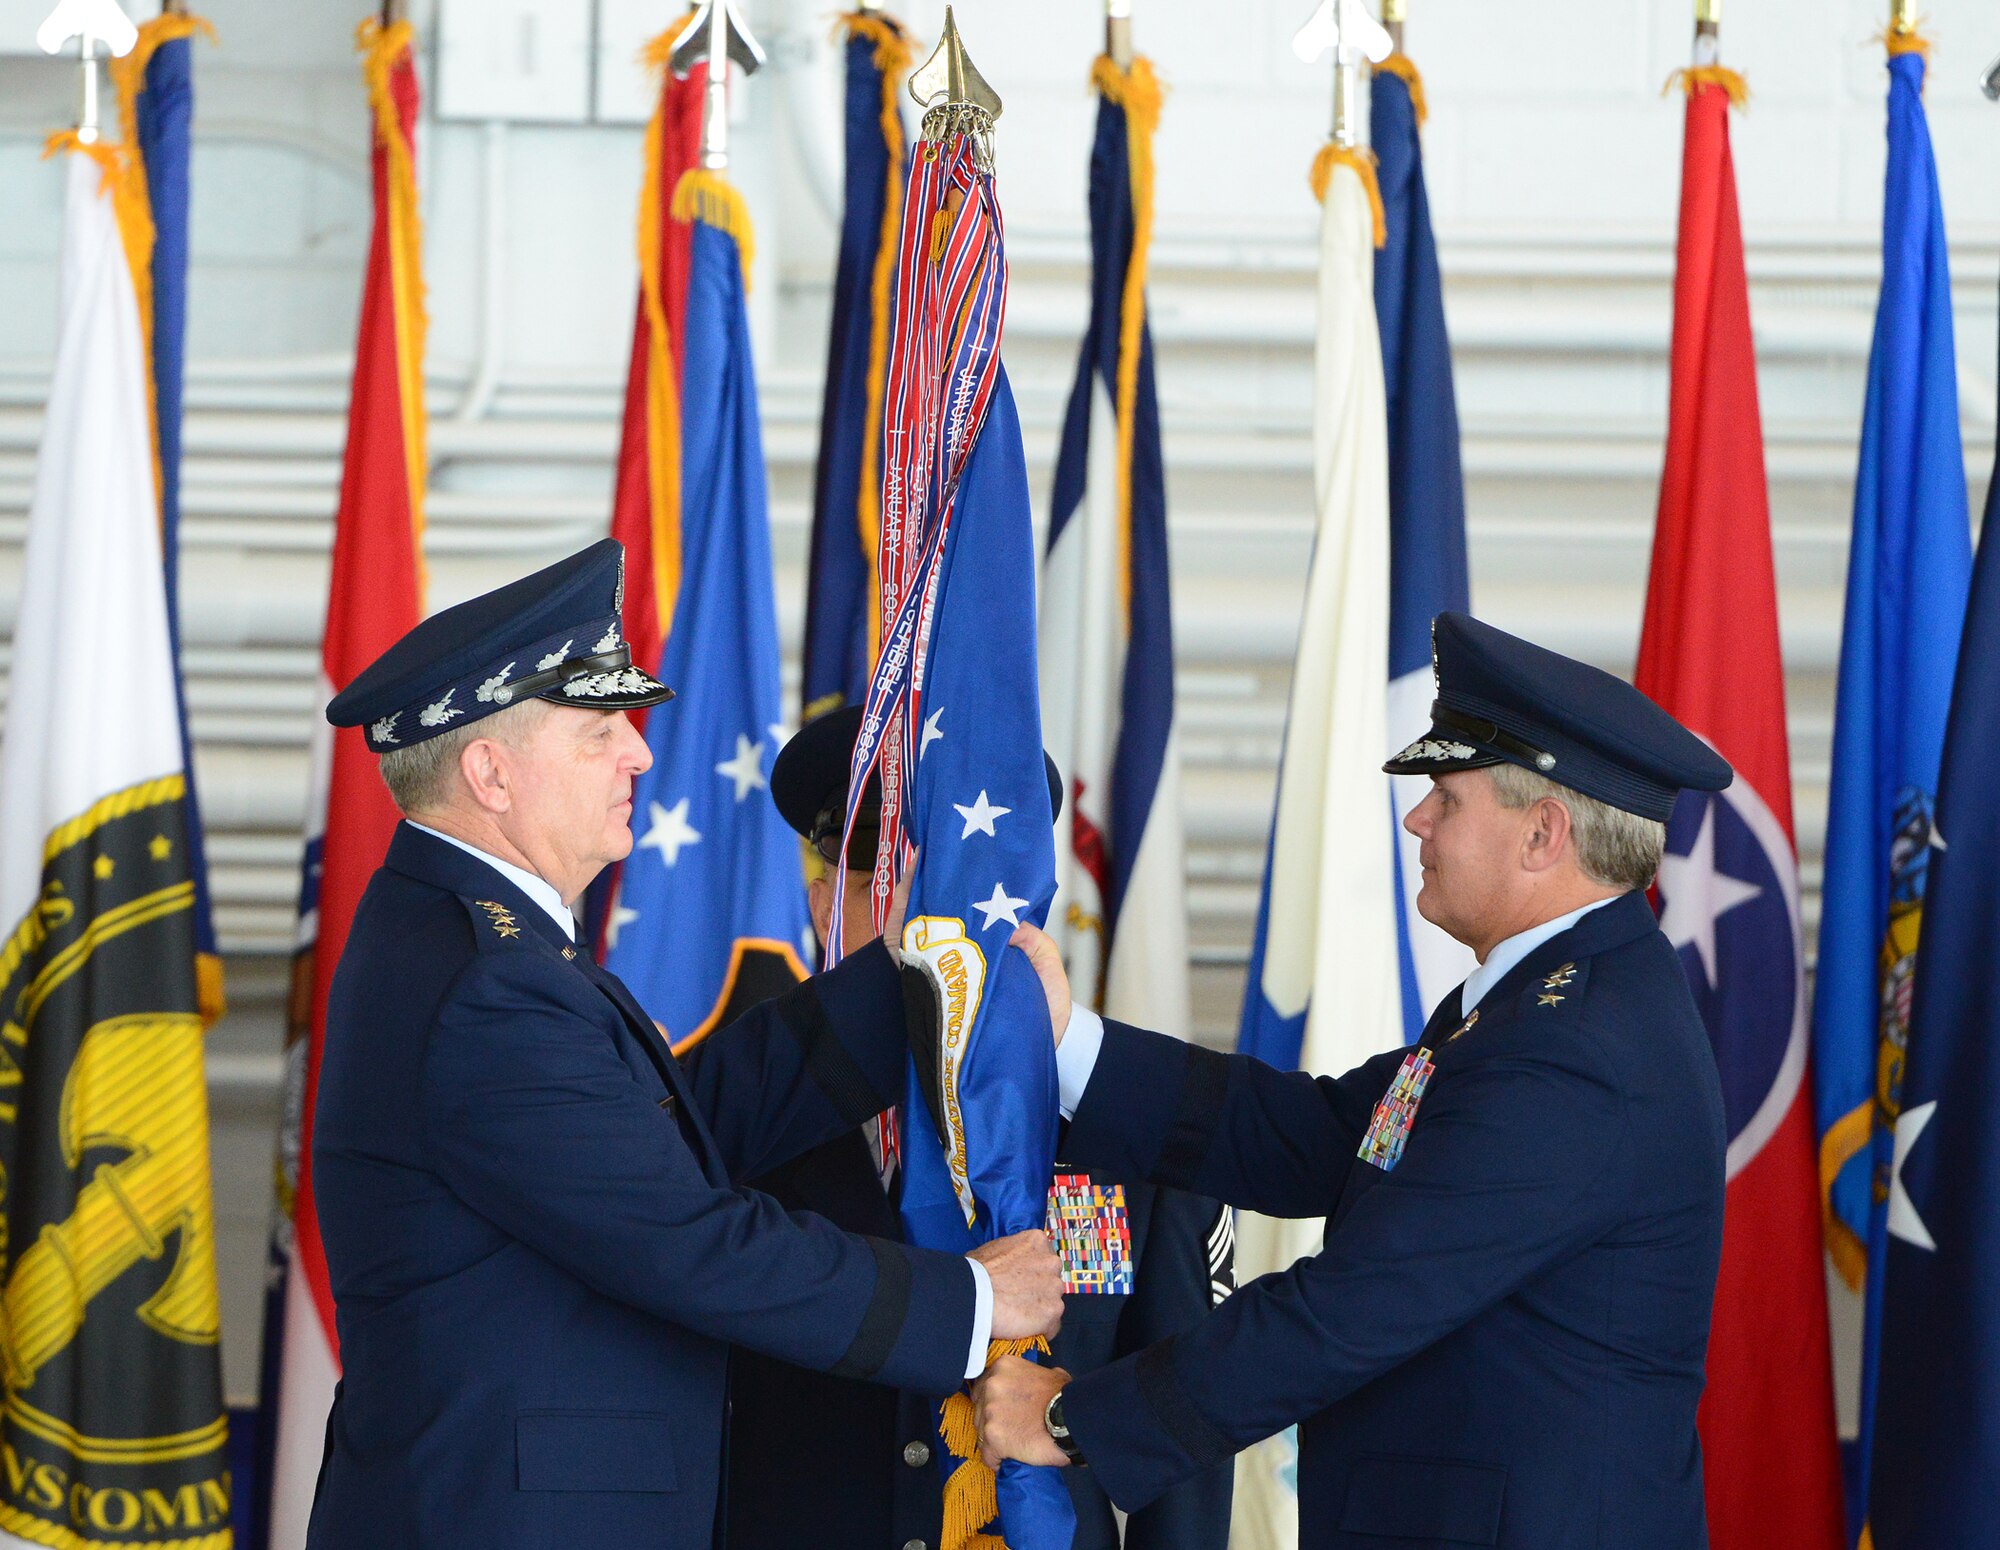 Lt. Gen. Eric E. Fiel relinquishes command of Air Force Special Operations Command to Air Force Chief of Staff Gen. Mark A. Welsh III during a change of command ceremony held at Hurlburt Field, Fla., July 3, 2014.  The command's mission is to present combat-ready Air Force Special Operations Forces to conduct and support global special operations missions. (U.S. Air Force photo by Master Sgt. Steven Pearsall)